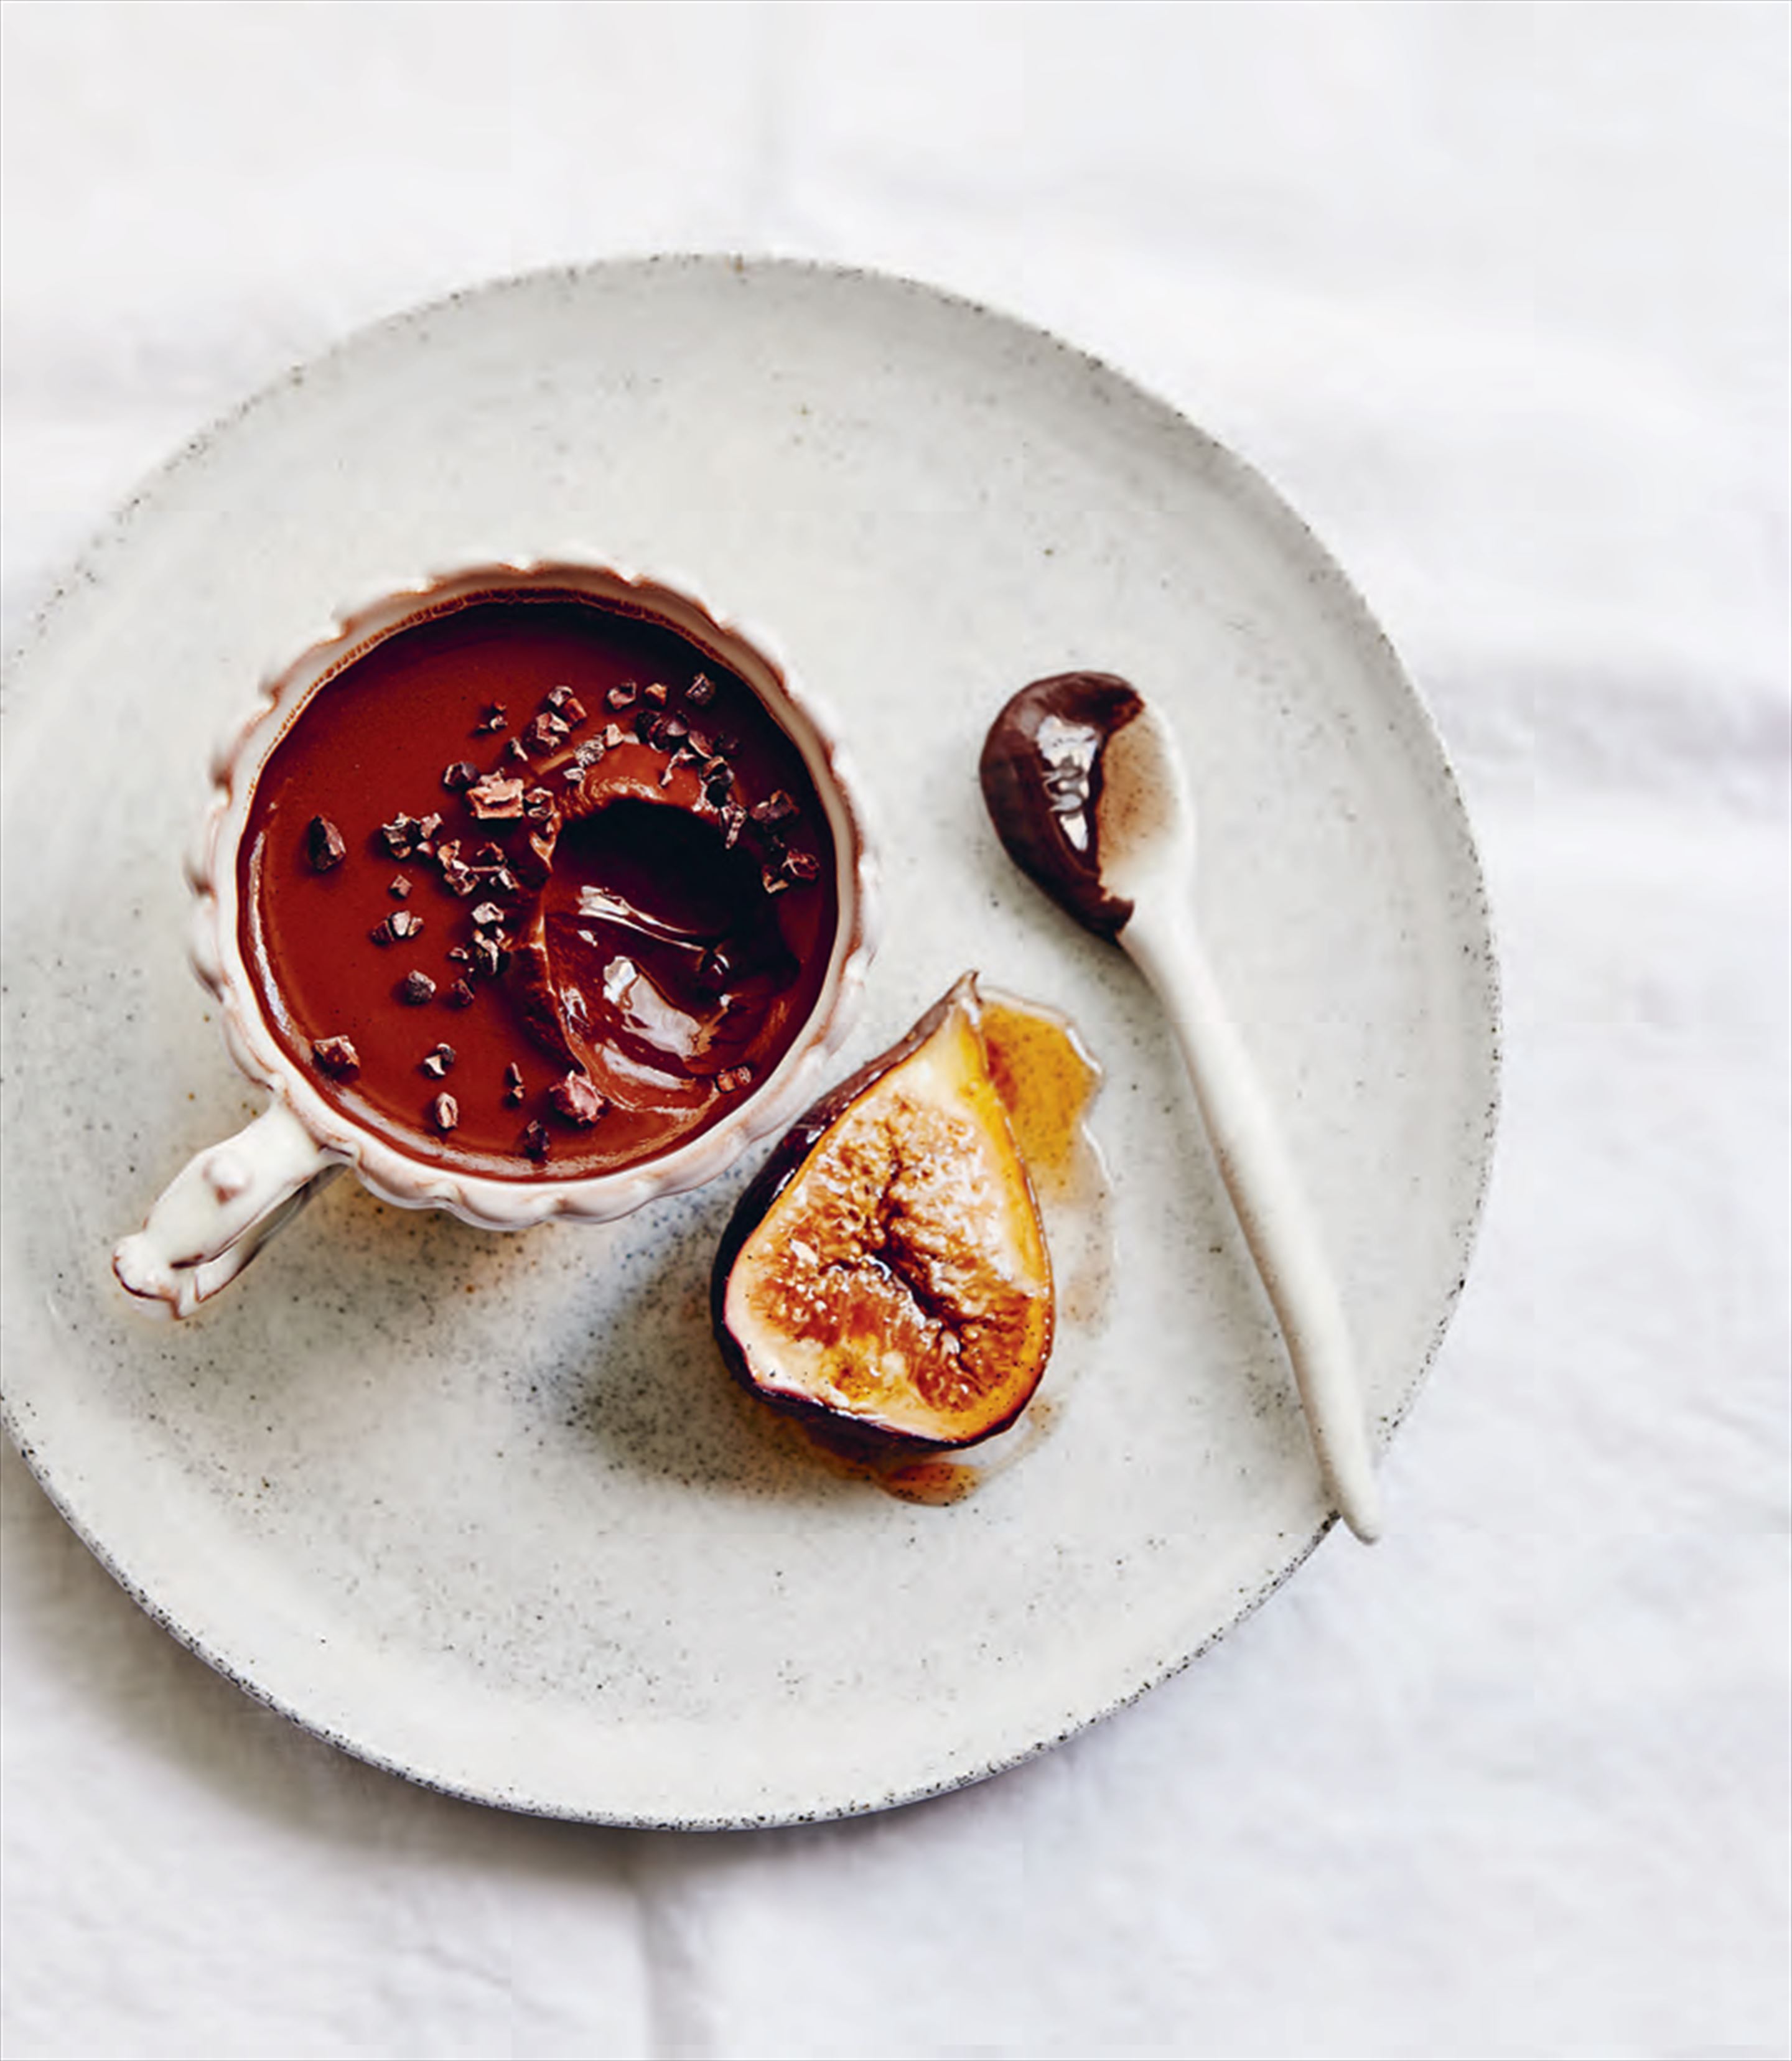 Mocha panna cotta with roasted figs